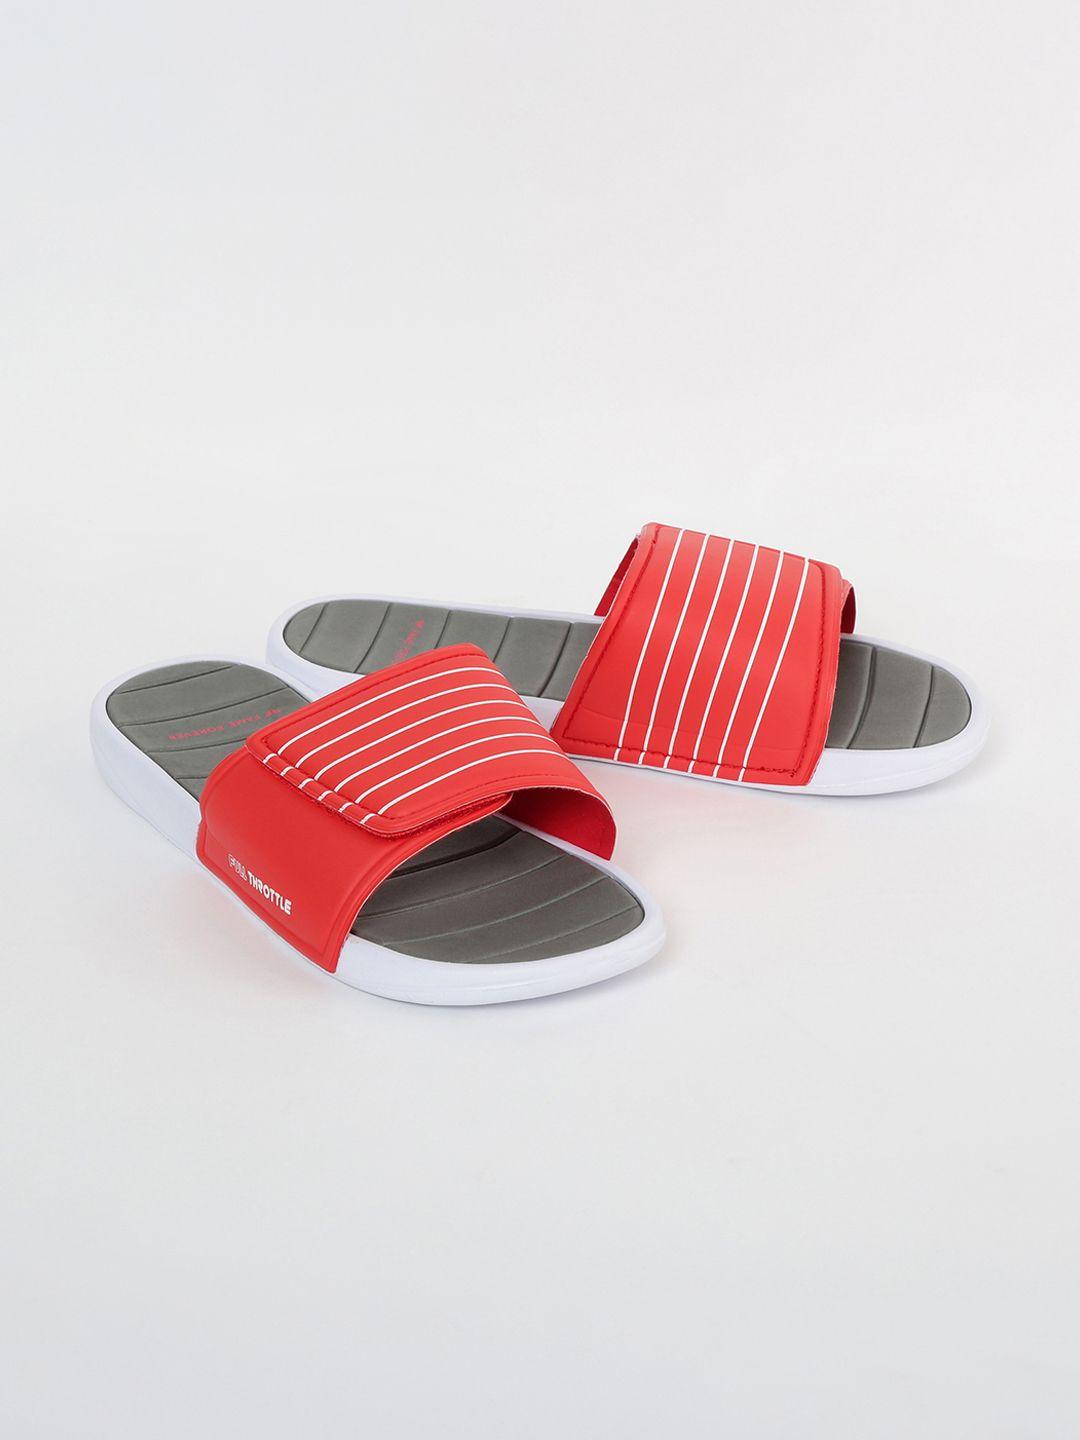 fame-forever-by-lifestyle-boys-red-&-white-striped-sliders